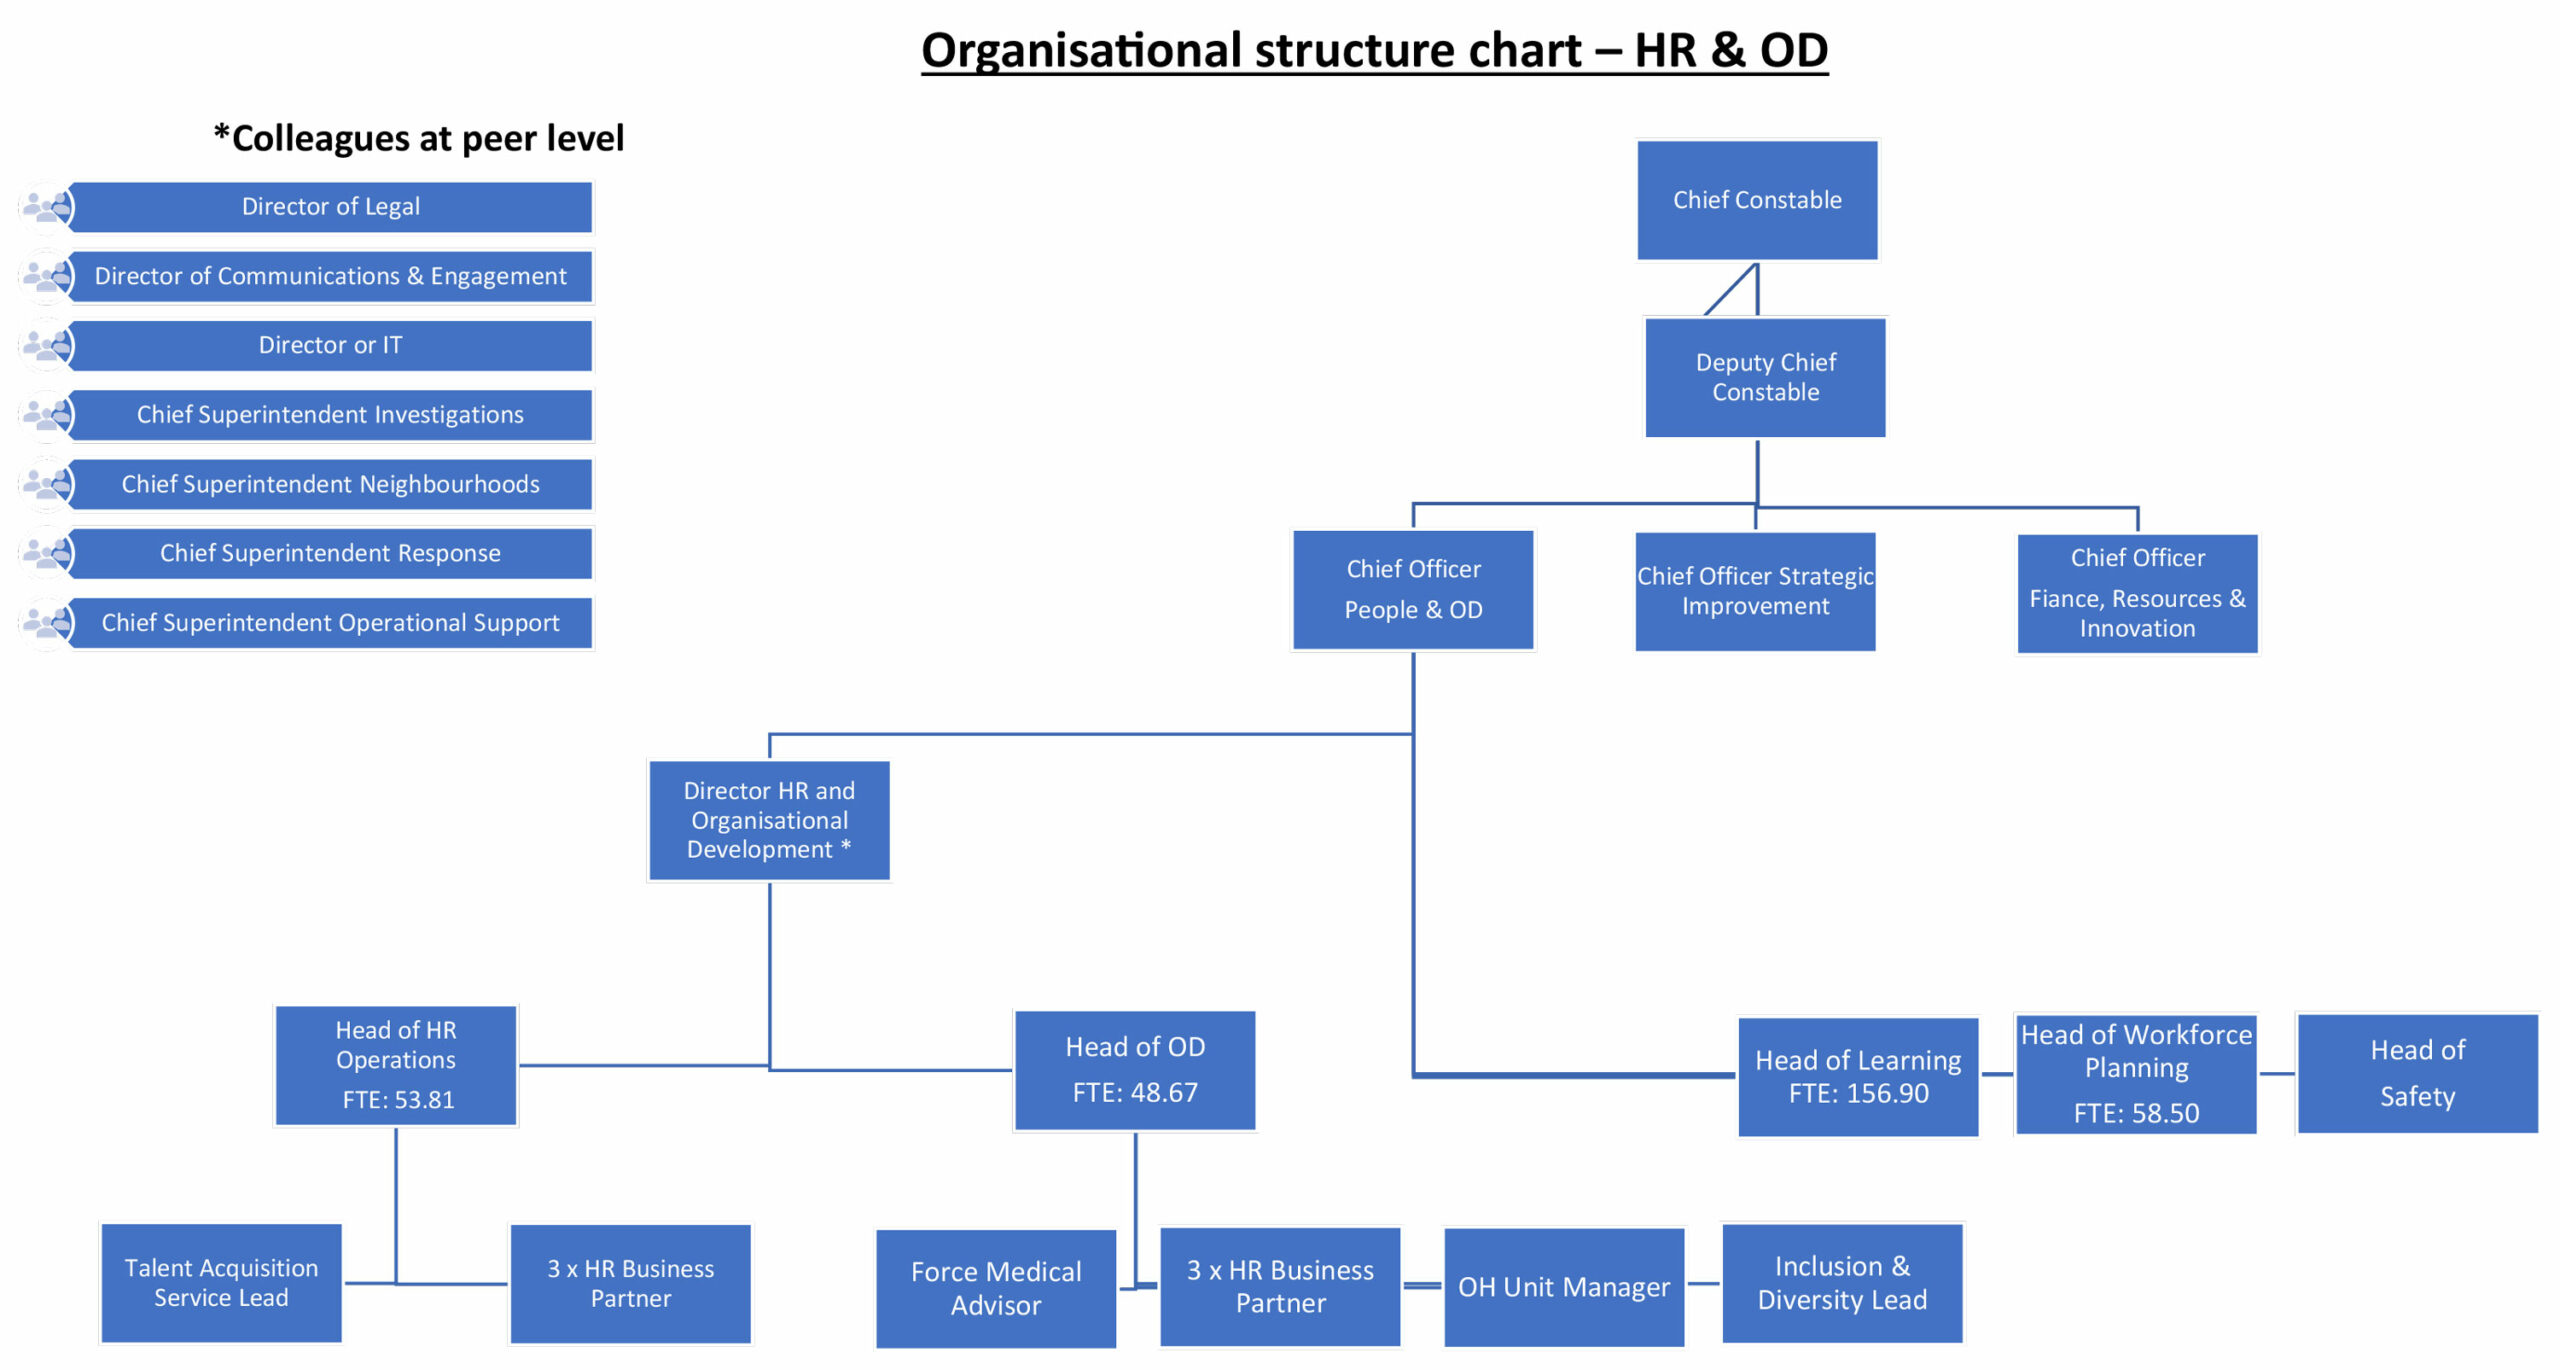 Structure-chart-HR-&-OD